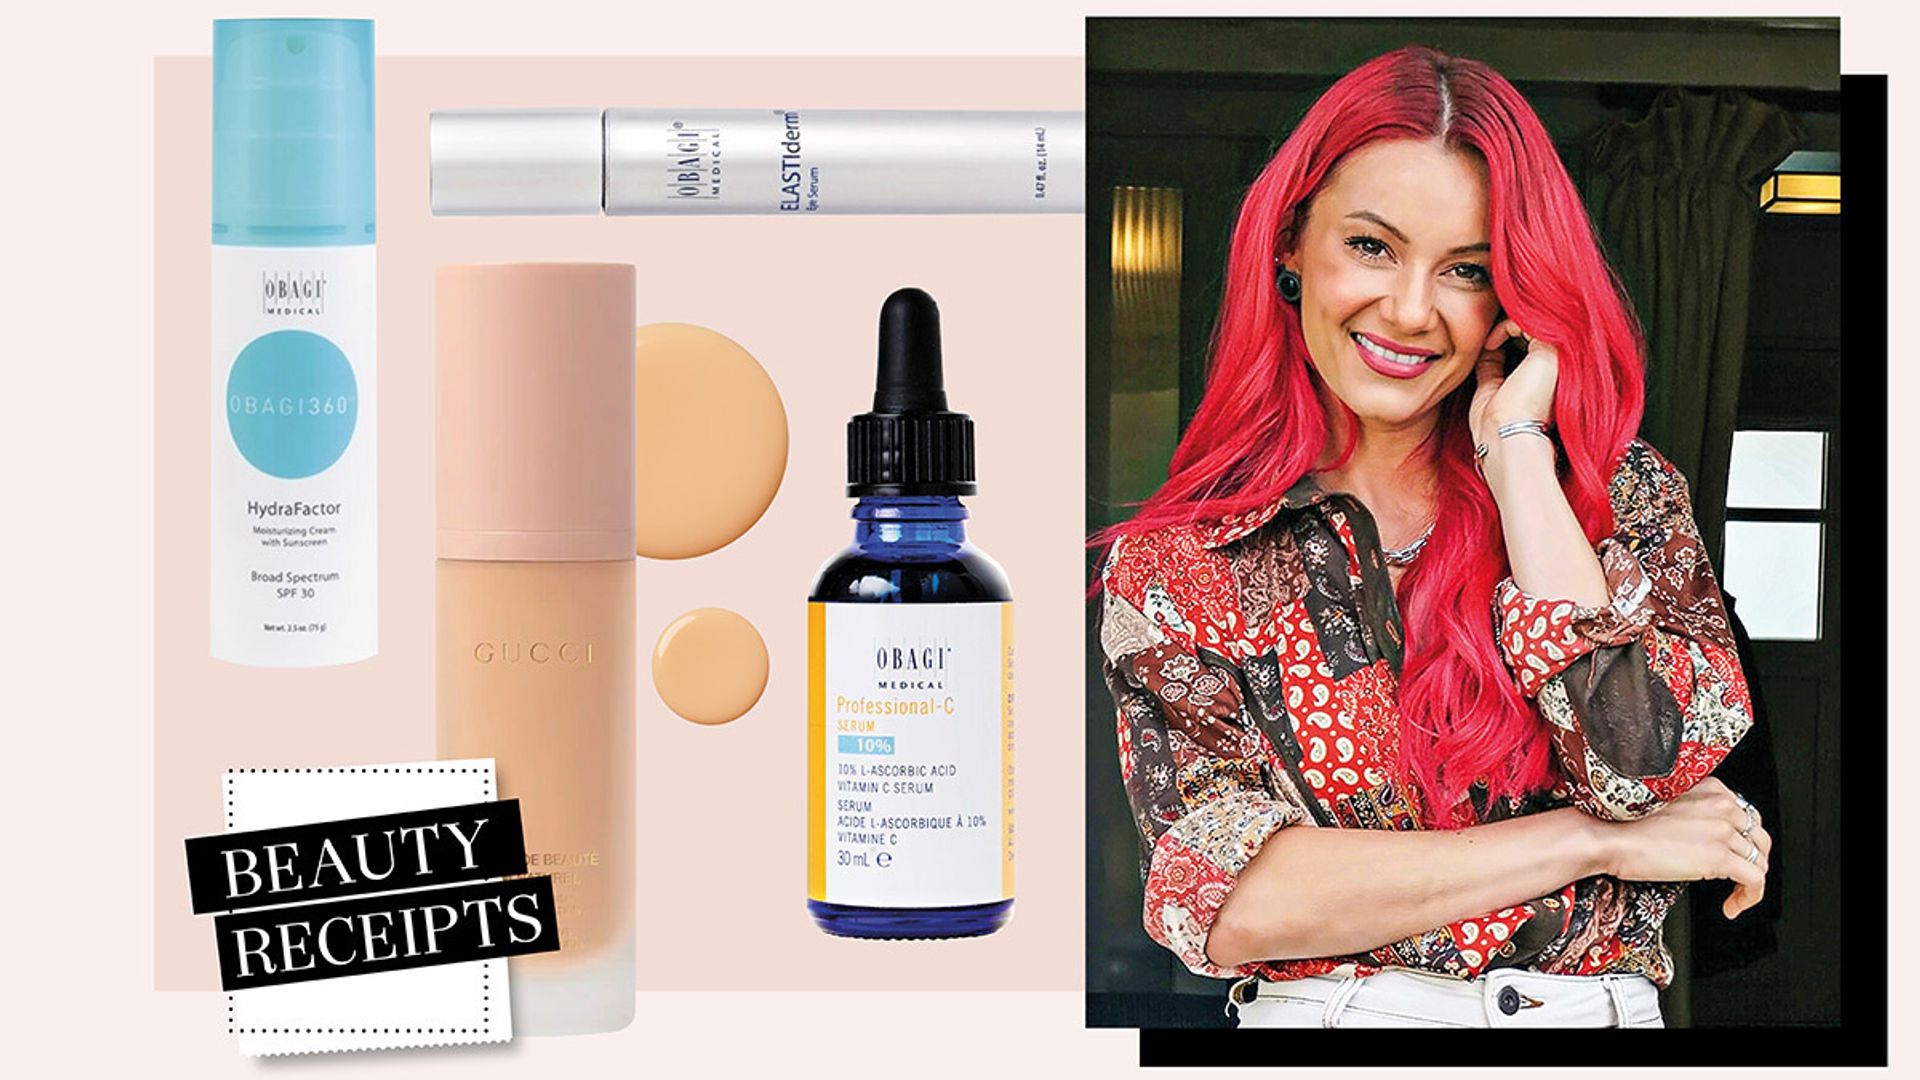 Beauty Receipts: What Strictly Come Dancing star Dianne Buswell's monthly beauty routine looks like